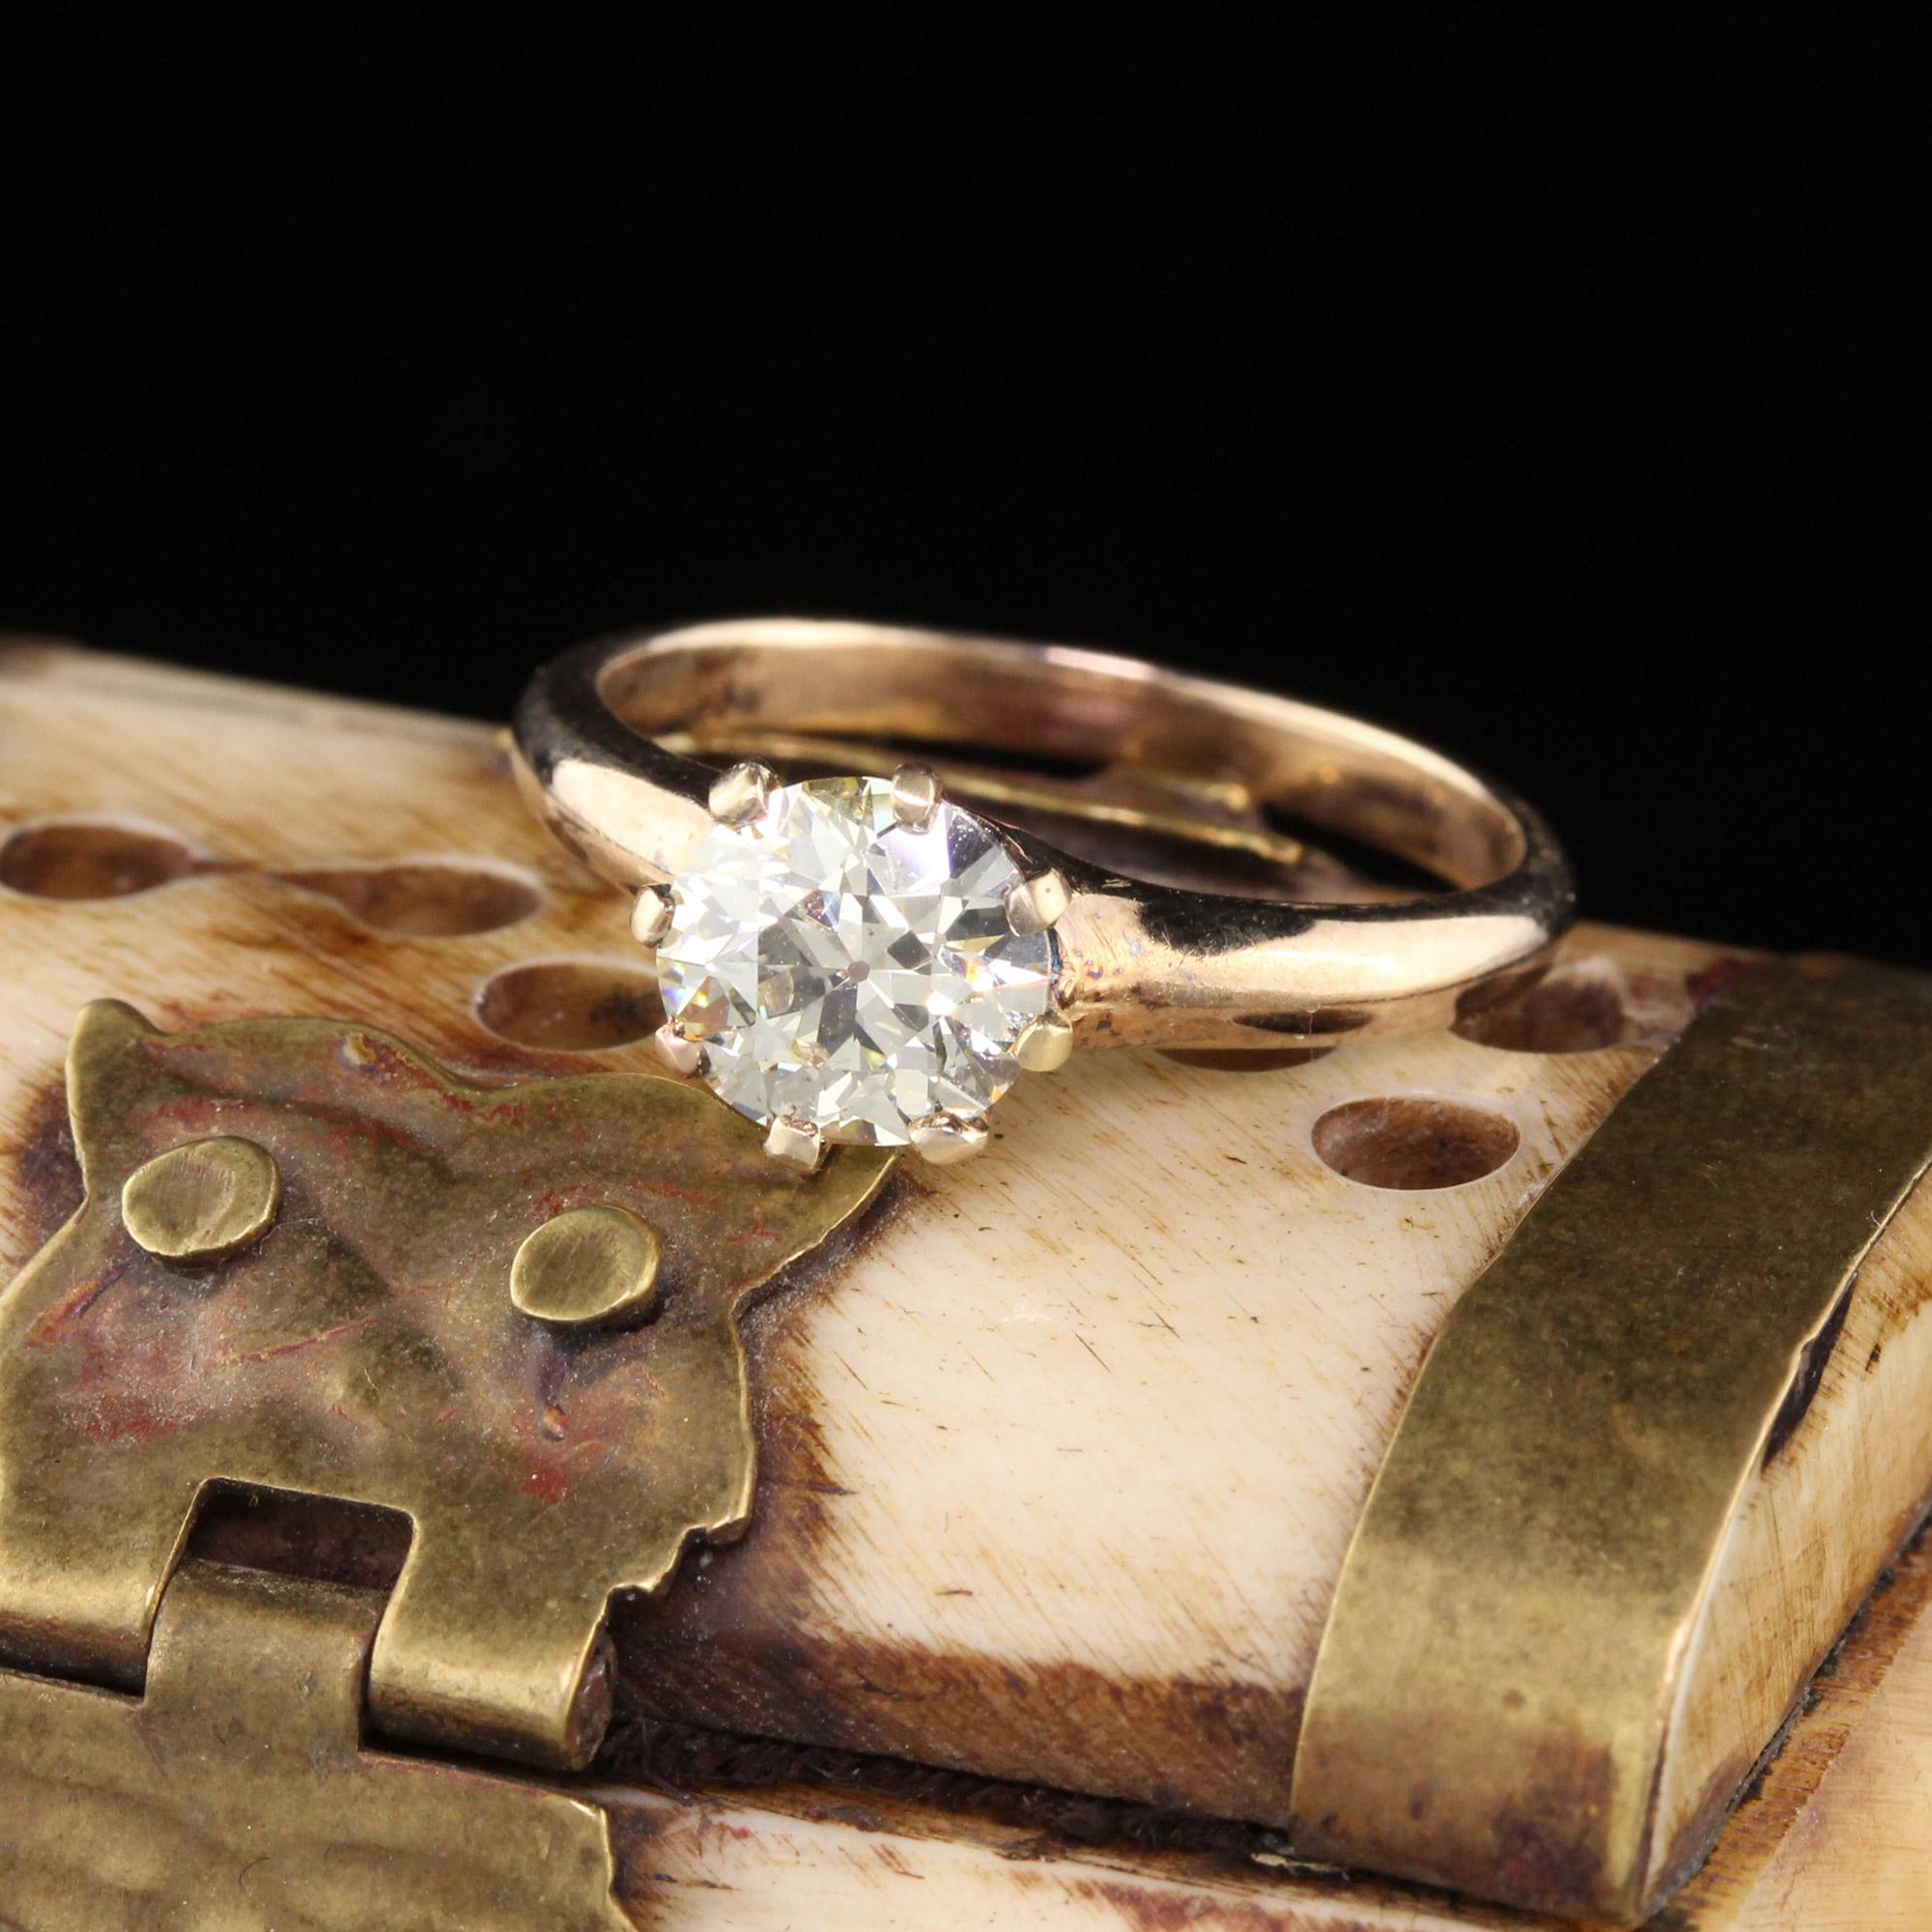 Classic Victorian Solitaire Engagement Ring with a warm color old european cut diamond in the center held by 8 prongs.

Item #R0384

Metal: 14K Yellow Gold 

Weight: 3.2 Grams

Diamond Weight: 1.27 ct old european cut diamond

Diamond Color: